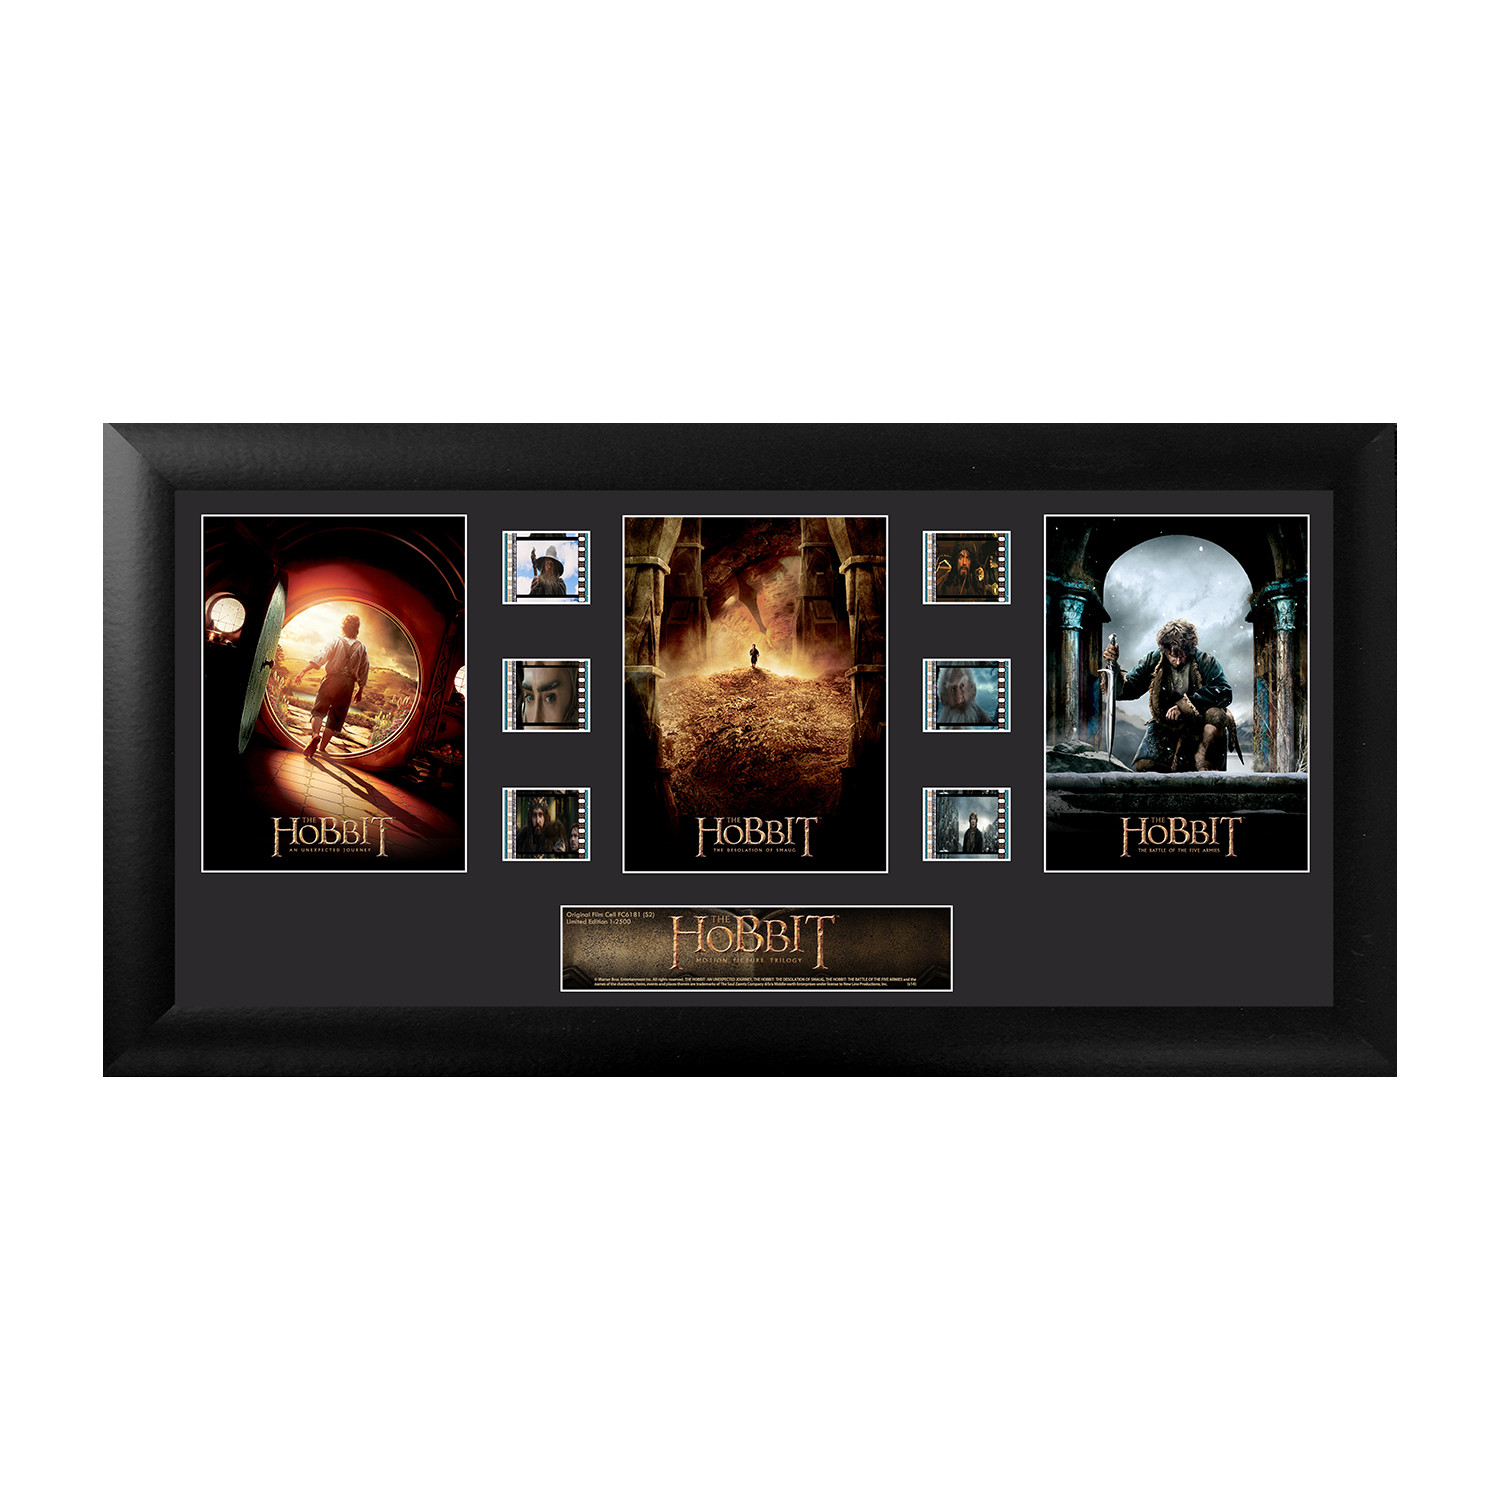 The Hobbit Trilogy // Limited Edition - Trend Setters LTD - Touch of Modern